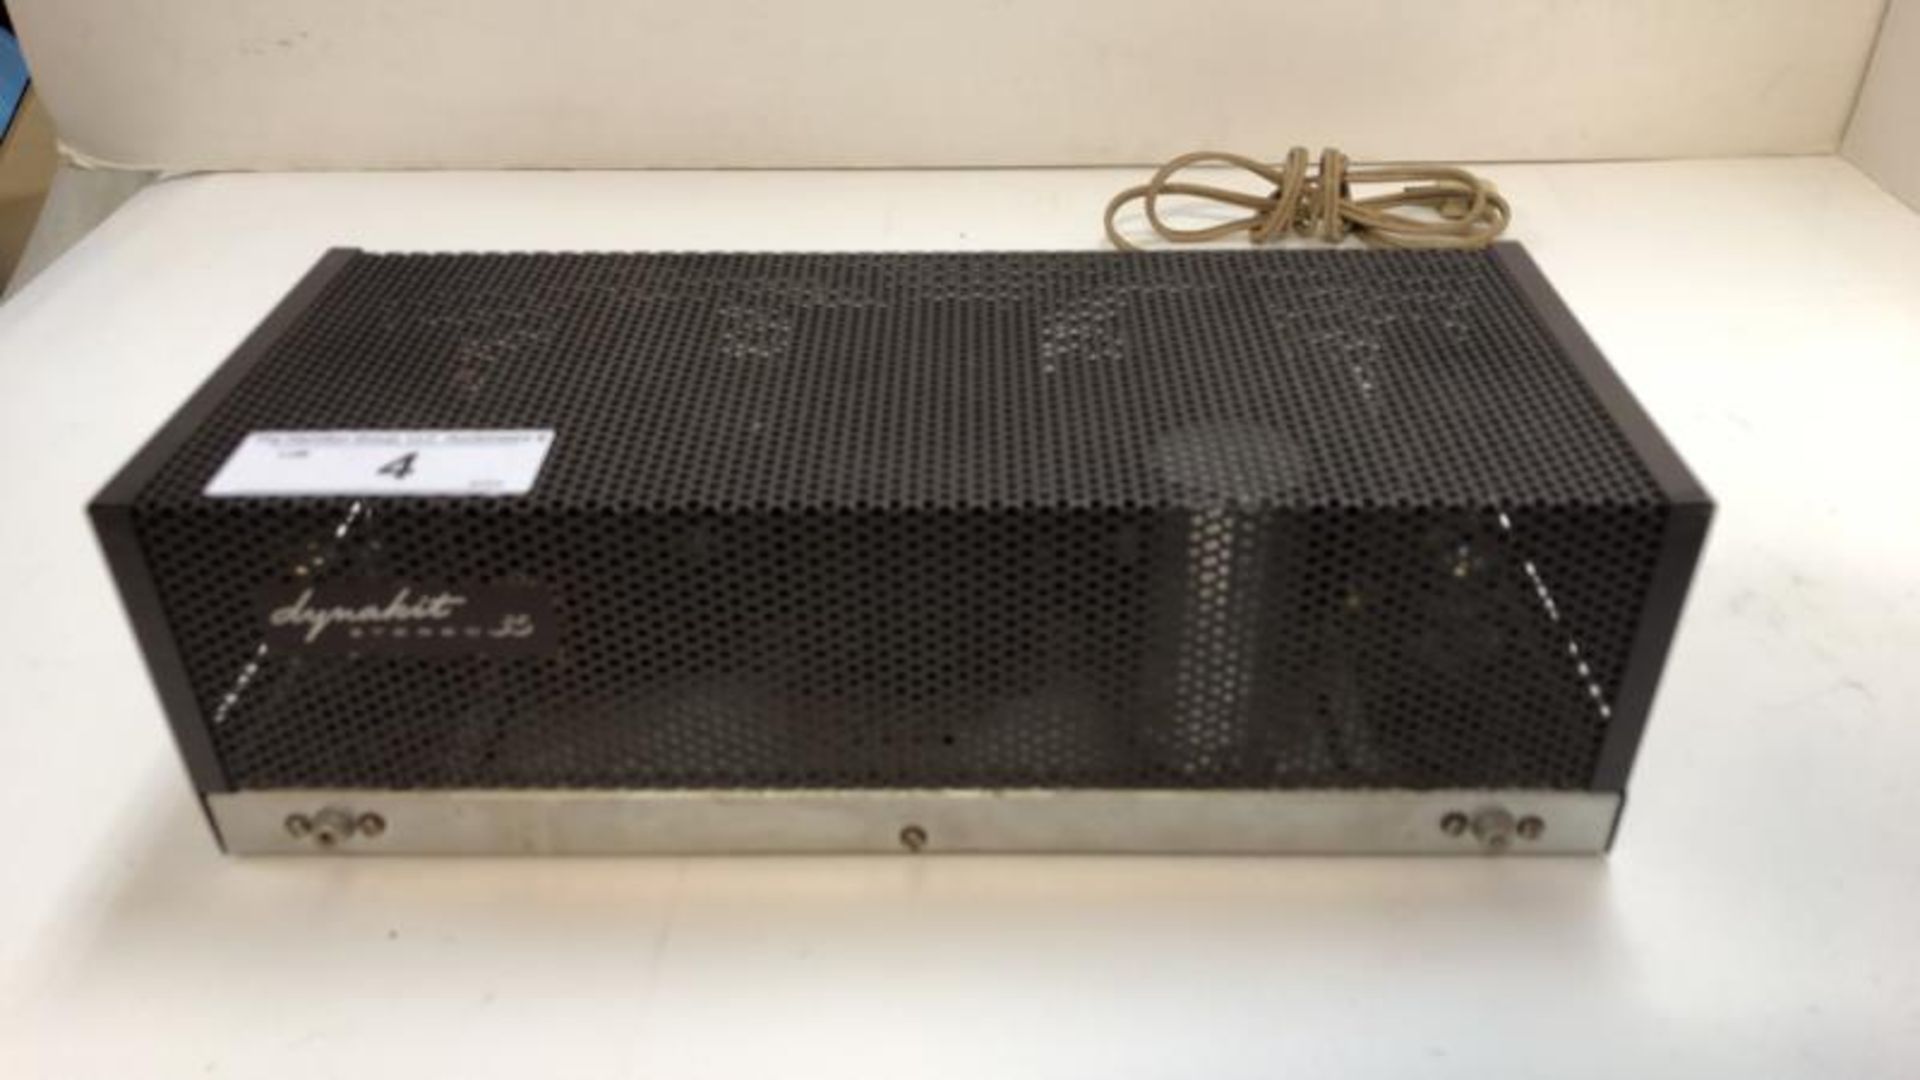 Dynaco dynakit stereo 35 tube amp, with cage